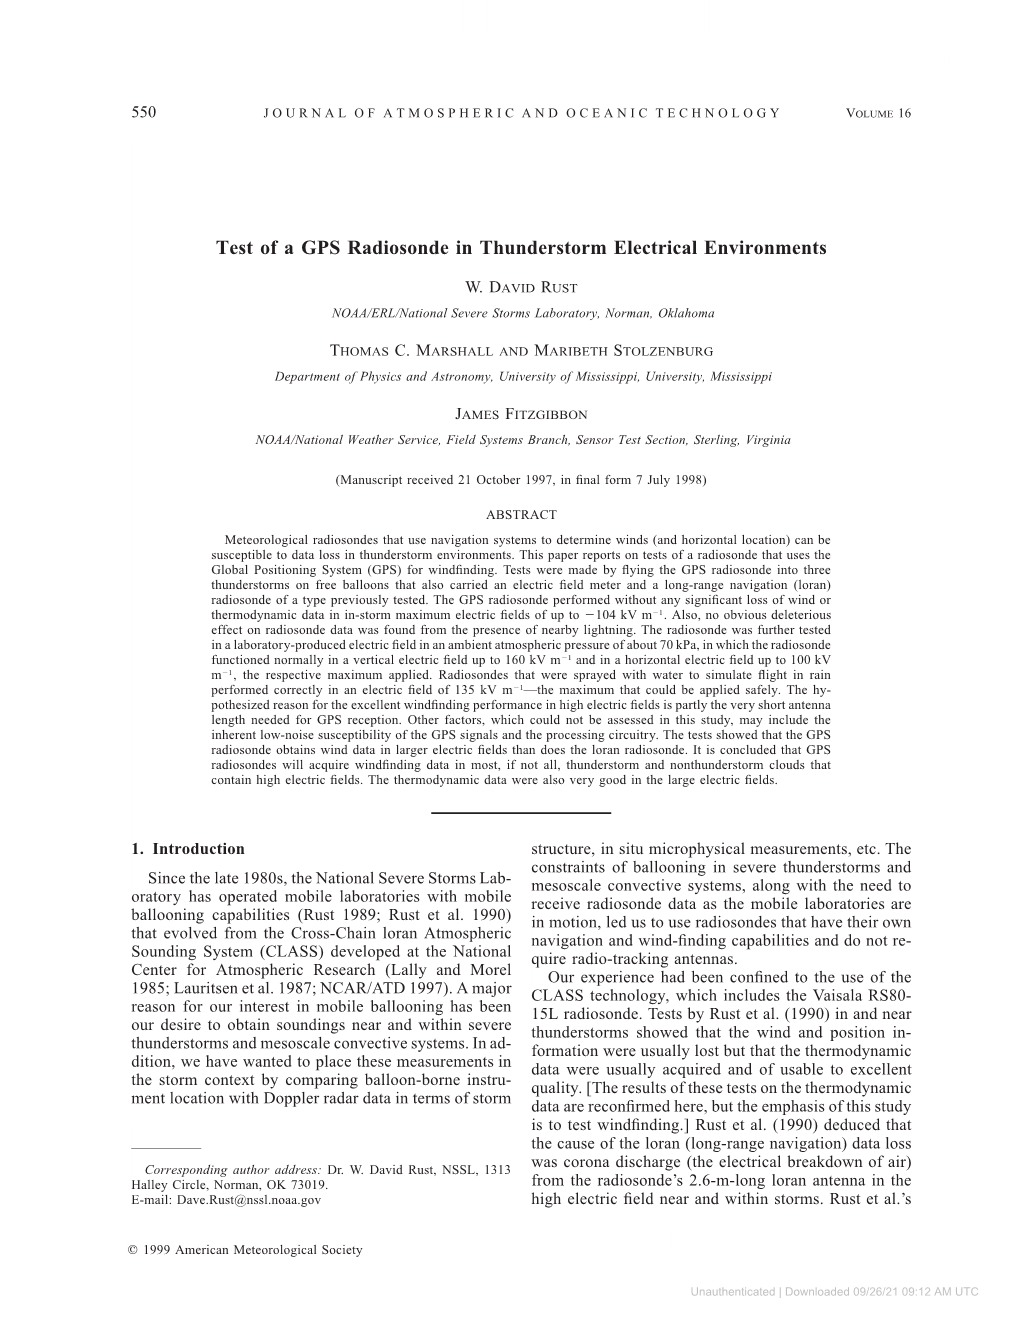 Test of a GPS Radiosonde in Thunderstorm Electrical Environments